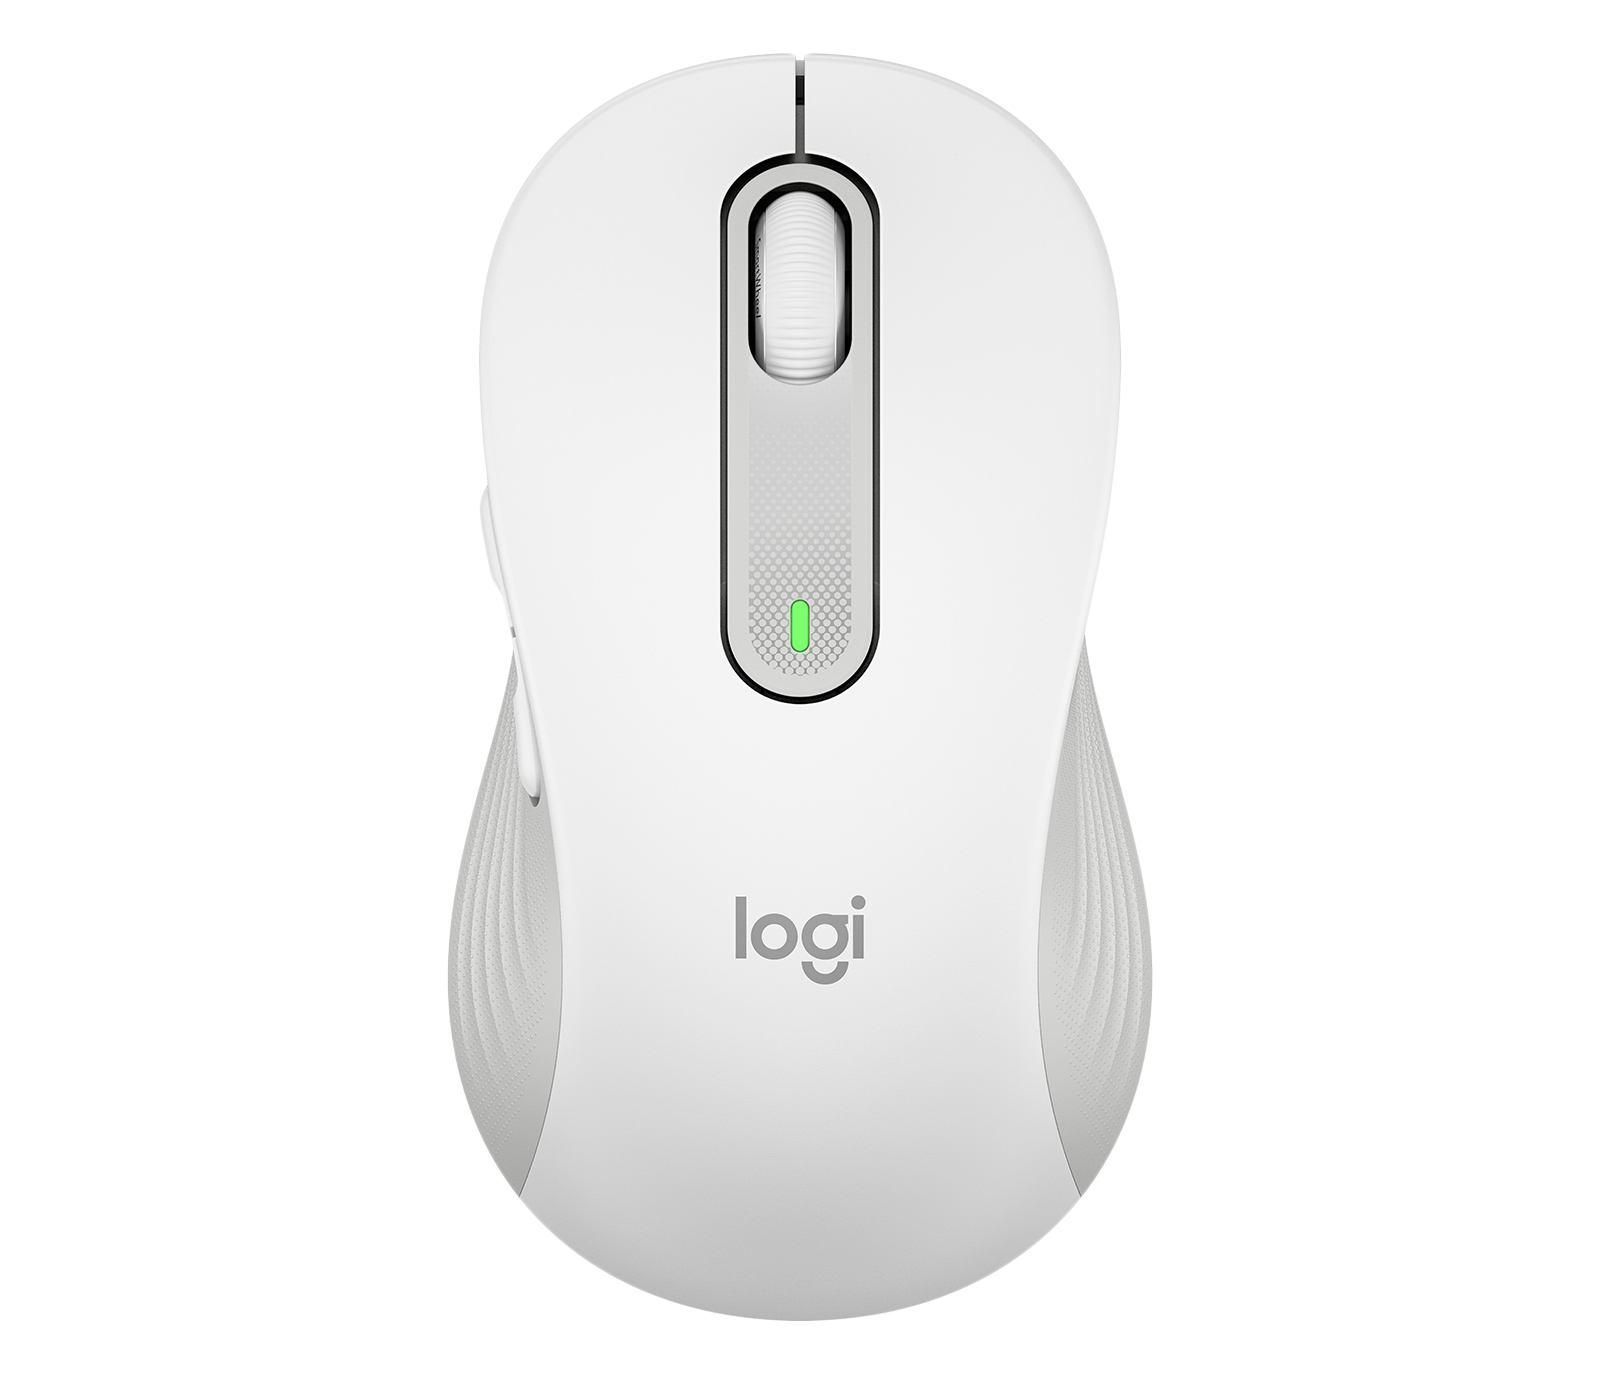 Logitech M650 Wireless Mice - Small, Large, Left Handed Mouse in Off-White